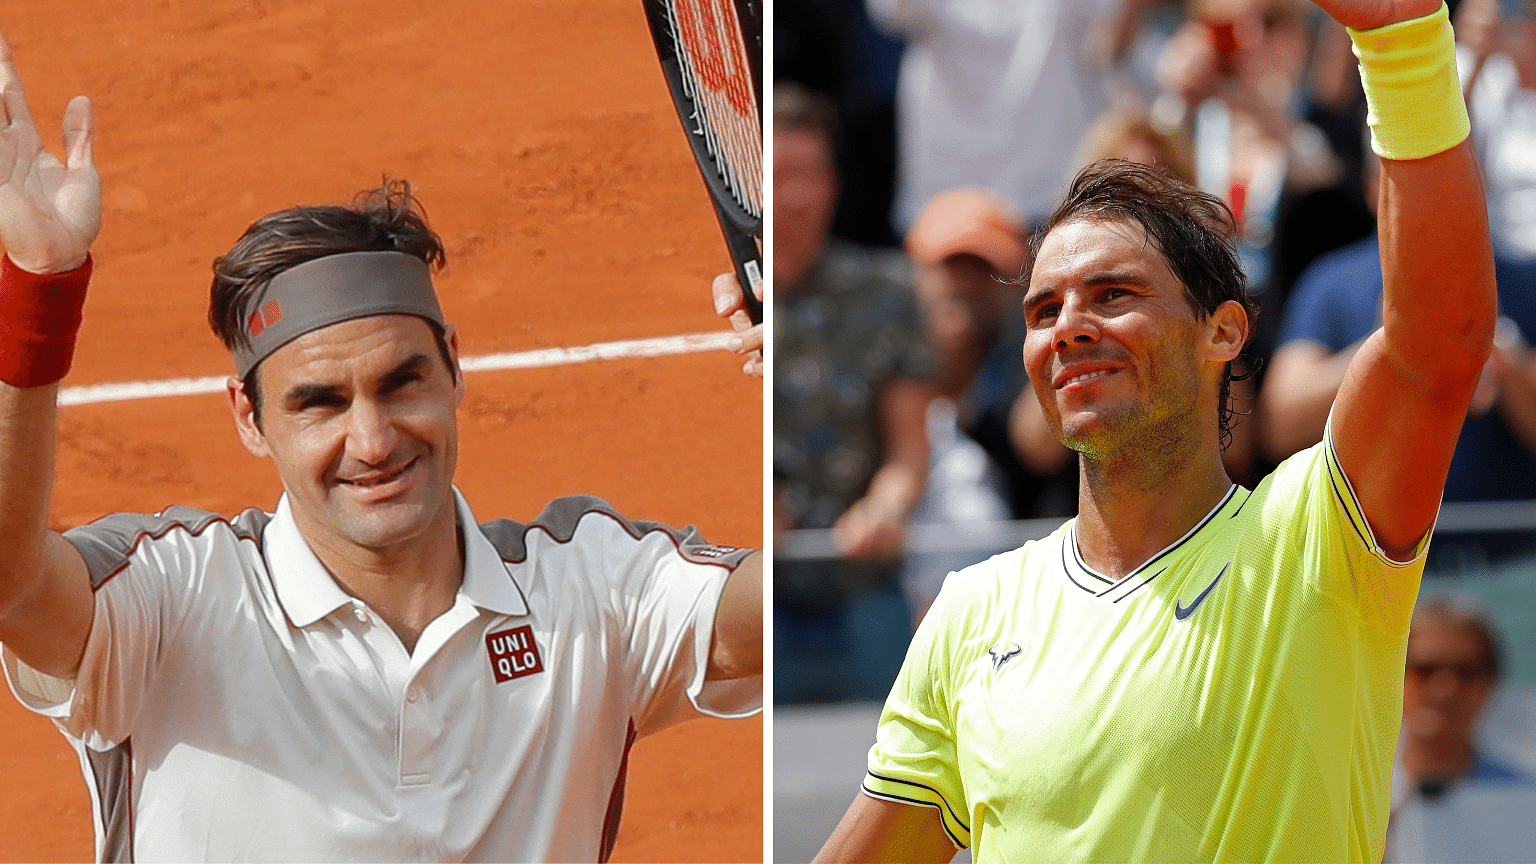  Roger Federer and Rafael Nadal moved a step further towards their potential semi-final clash in men’s singles.